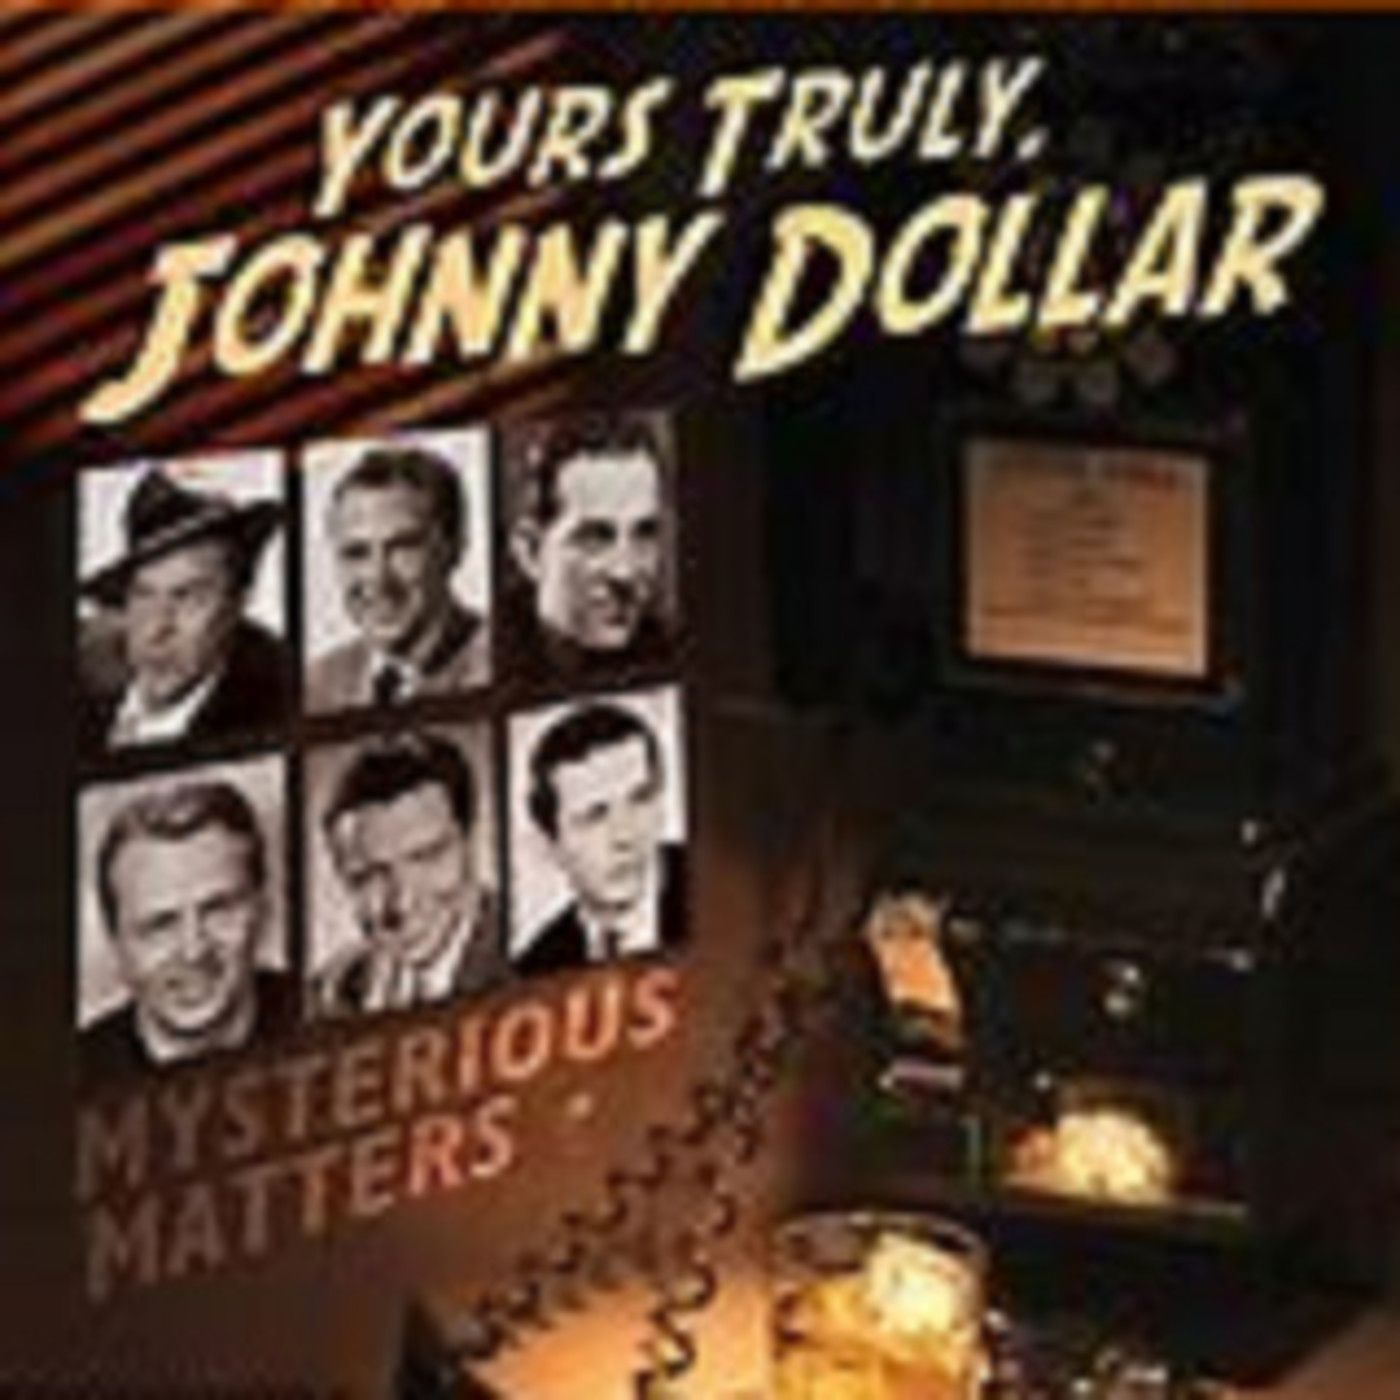 Yours Truly, Johnny Dollar - 091160, episode 705 - The Too Much Money Matter